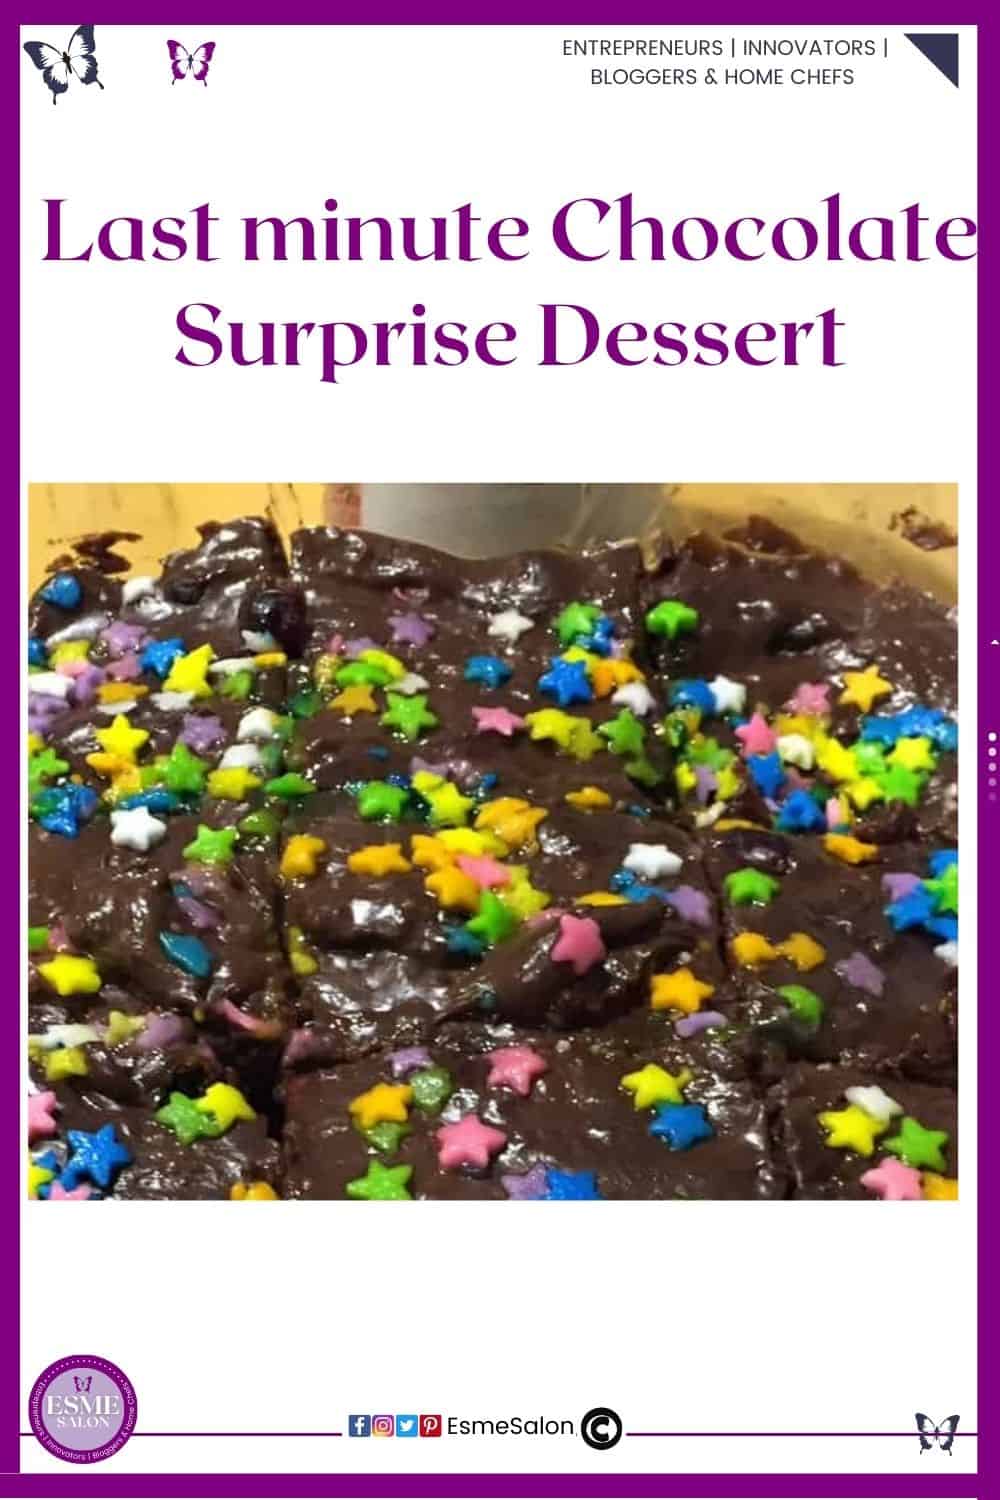 an image of a brown Chocolate Surprise Dessert in a rectangular dish